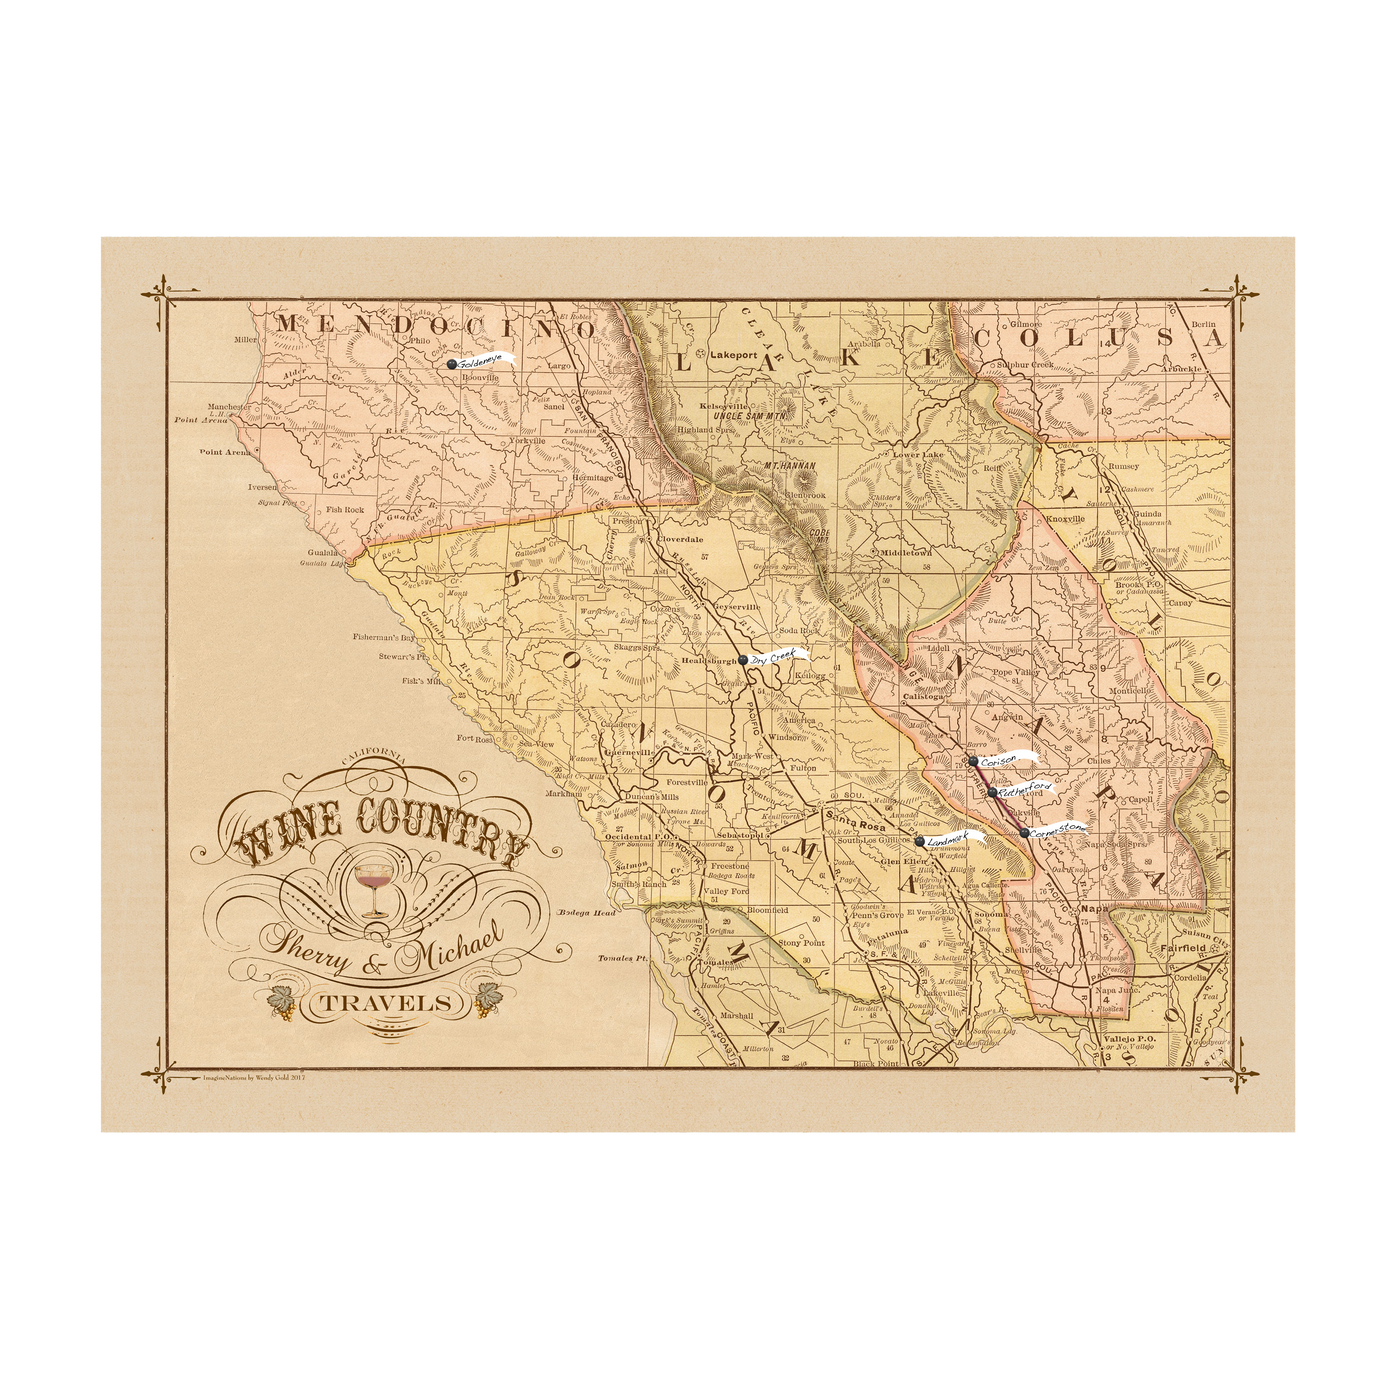 Wine Country Napa Sonoma Winery Tasting Pin Map transparent | all:transparent